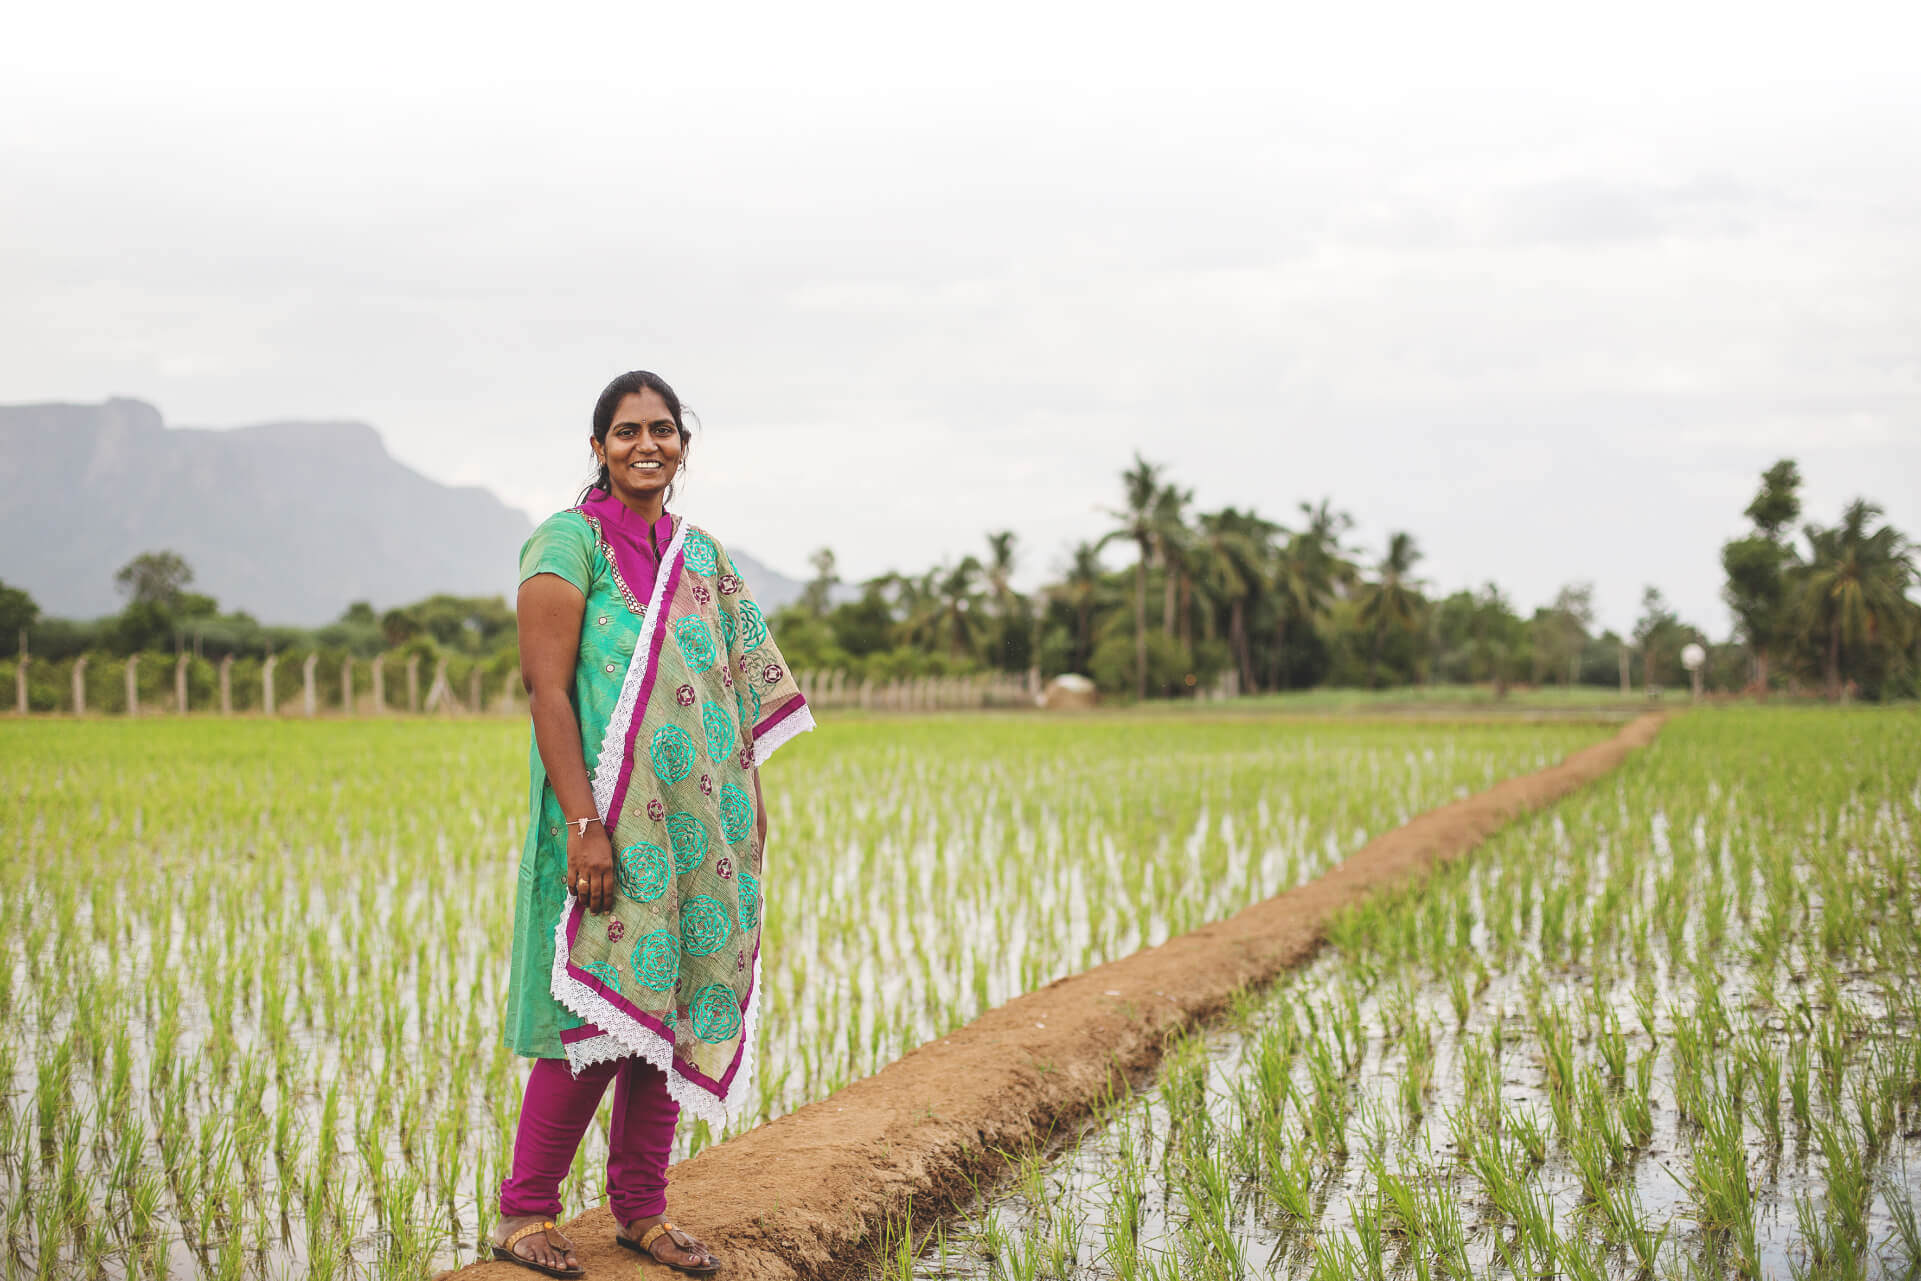 A smiling woman in a churidar stands in front of a paddy field that stretches to the horizon. Palm trees grow in the background and a mountainous landscape shows through clouds that sweeps across the sky.